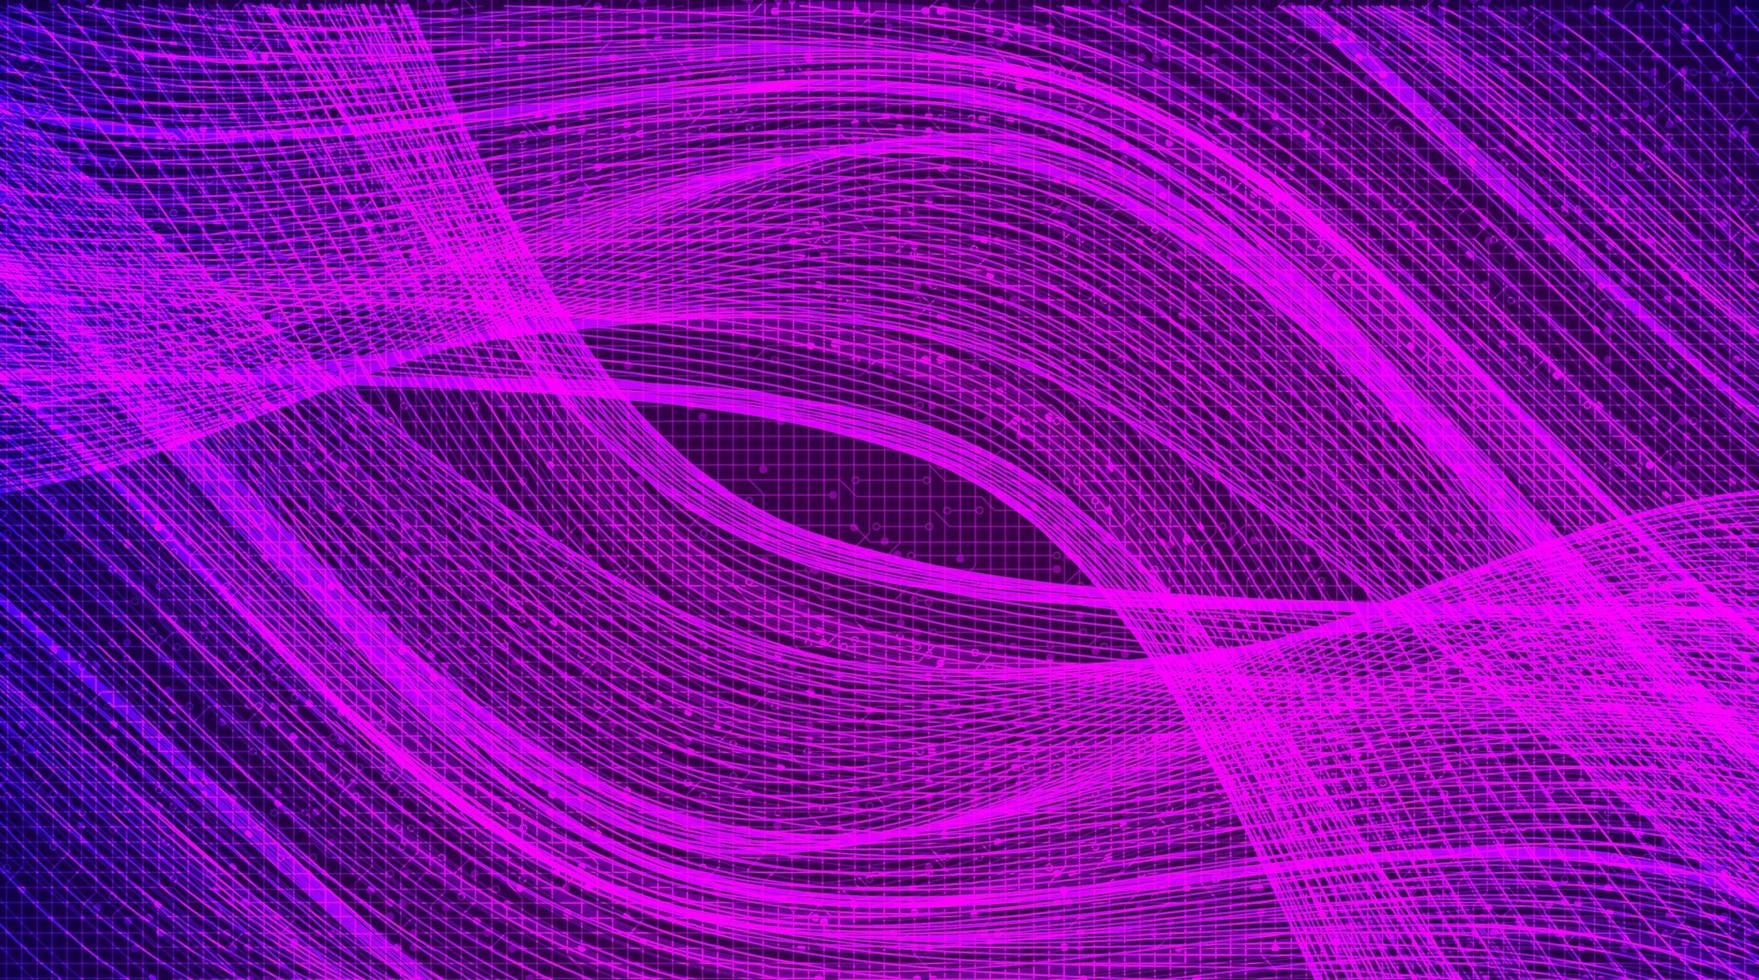 Waving Dynamic Line on Violet Circuit Microchip Technology Background vector